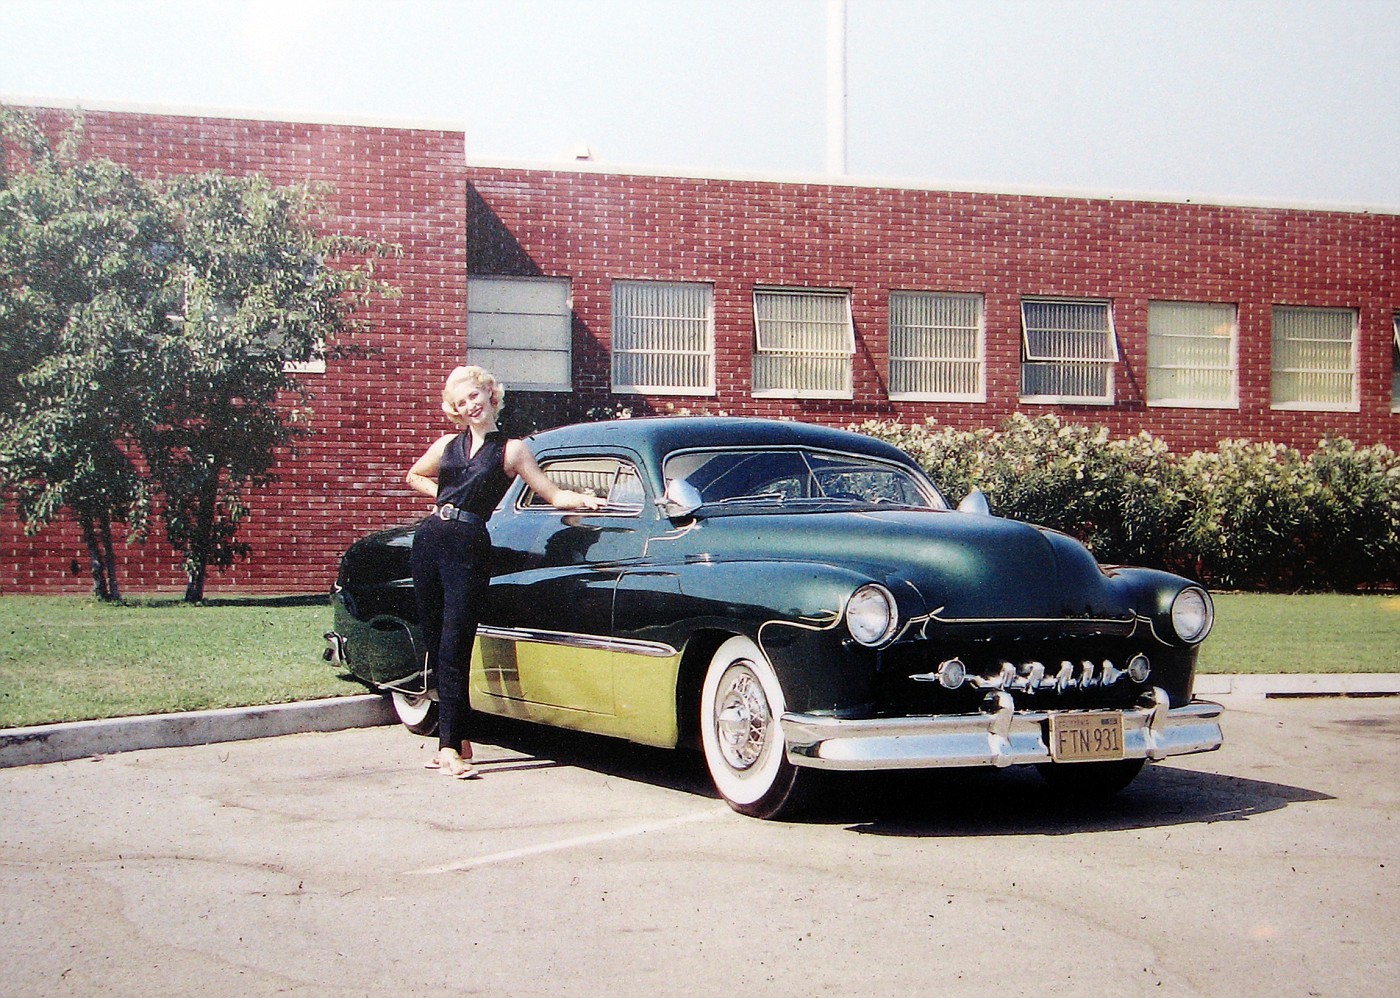 Frank Sonzogni's'50 Butch Hurley Curly Tremayne's'50 Merc coupe built by